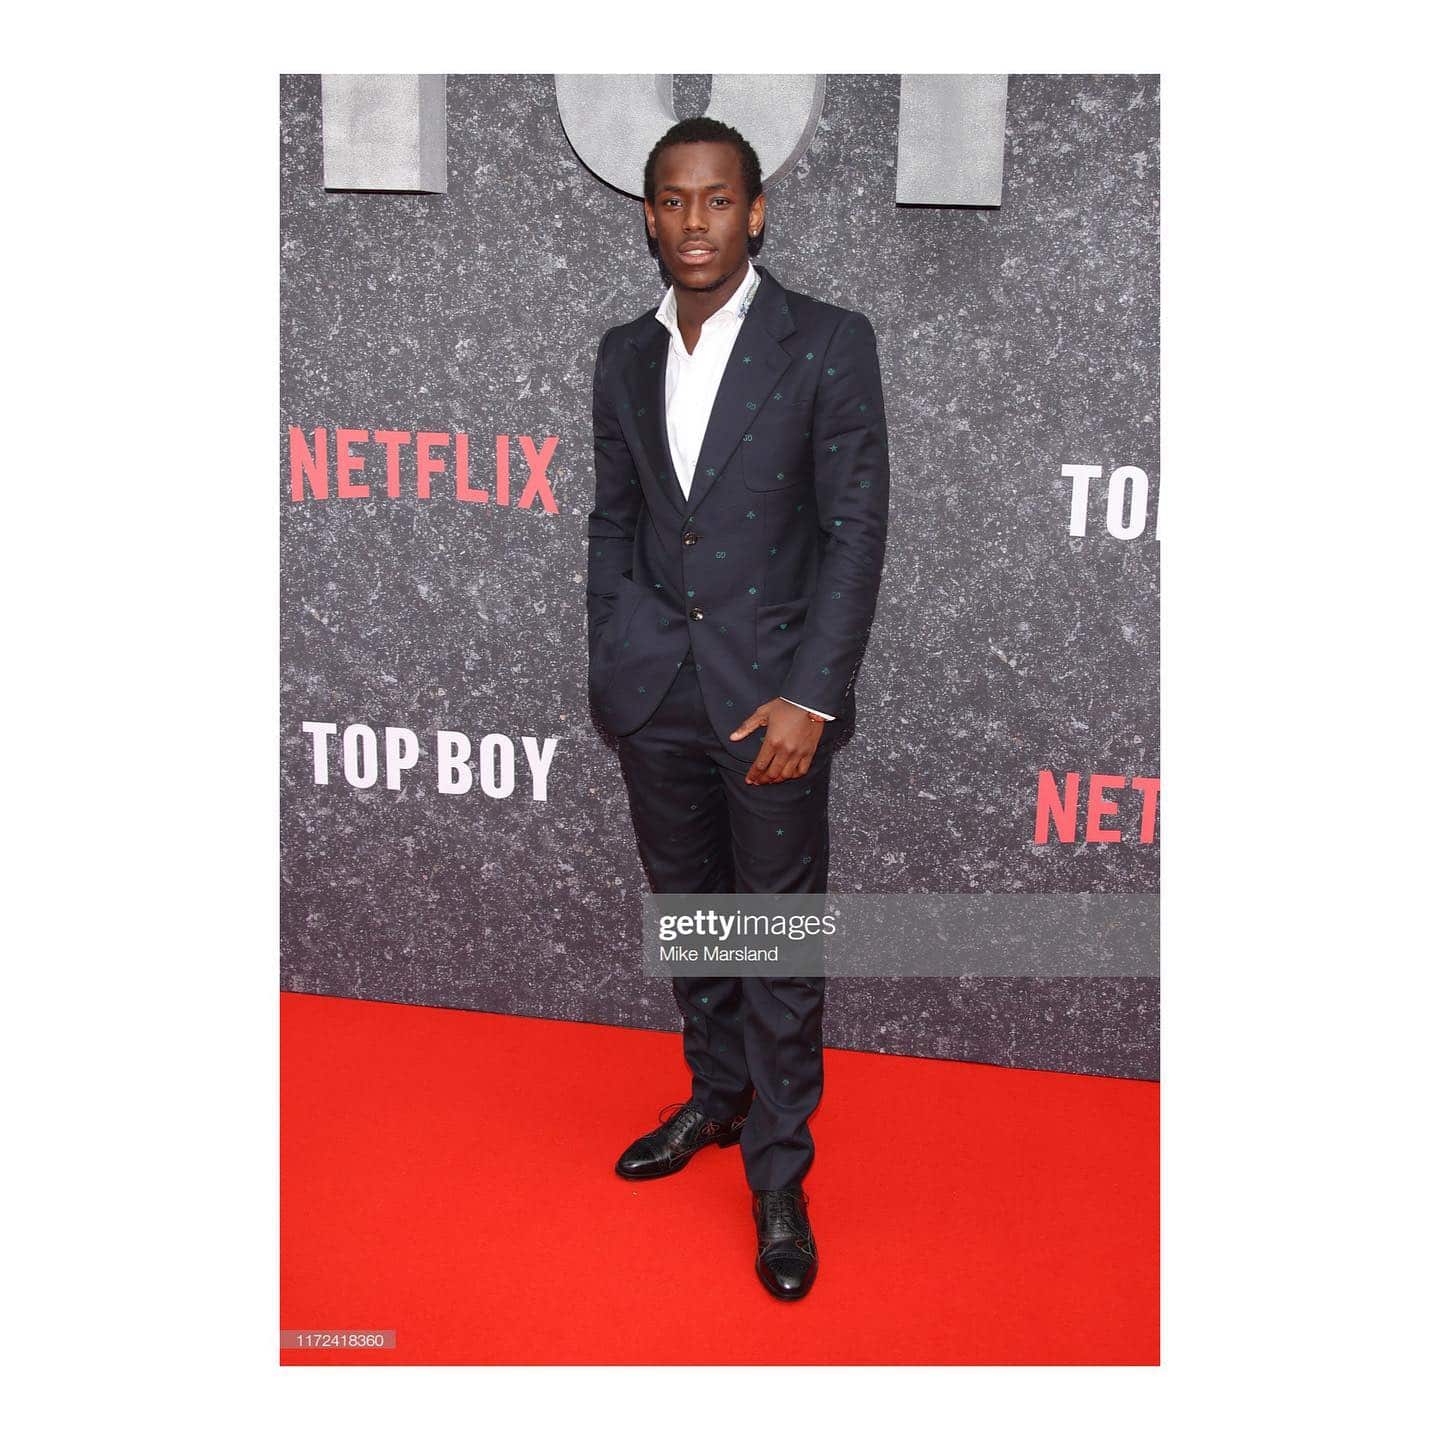 @michealward at last night’s premiere of @topboynetflix which will launch GLOBALLY on @netflix on 13th September 
.
.
.
.
📸: Getty, @mikemarslandphotos & @ashleyverse : @gucci .
.
.